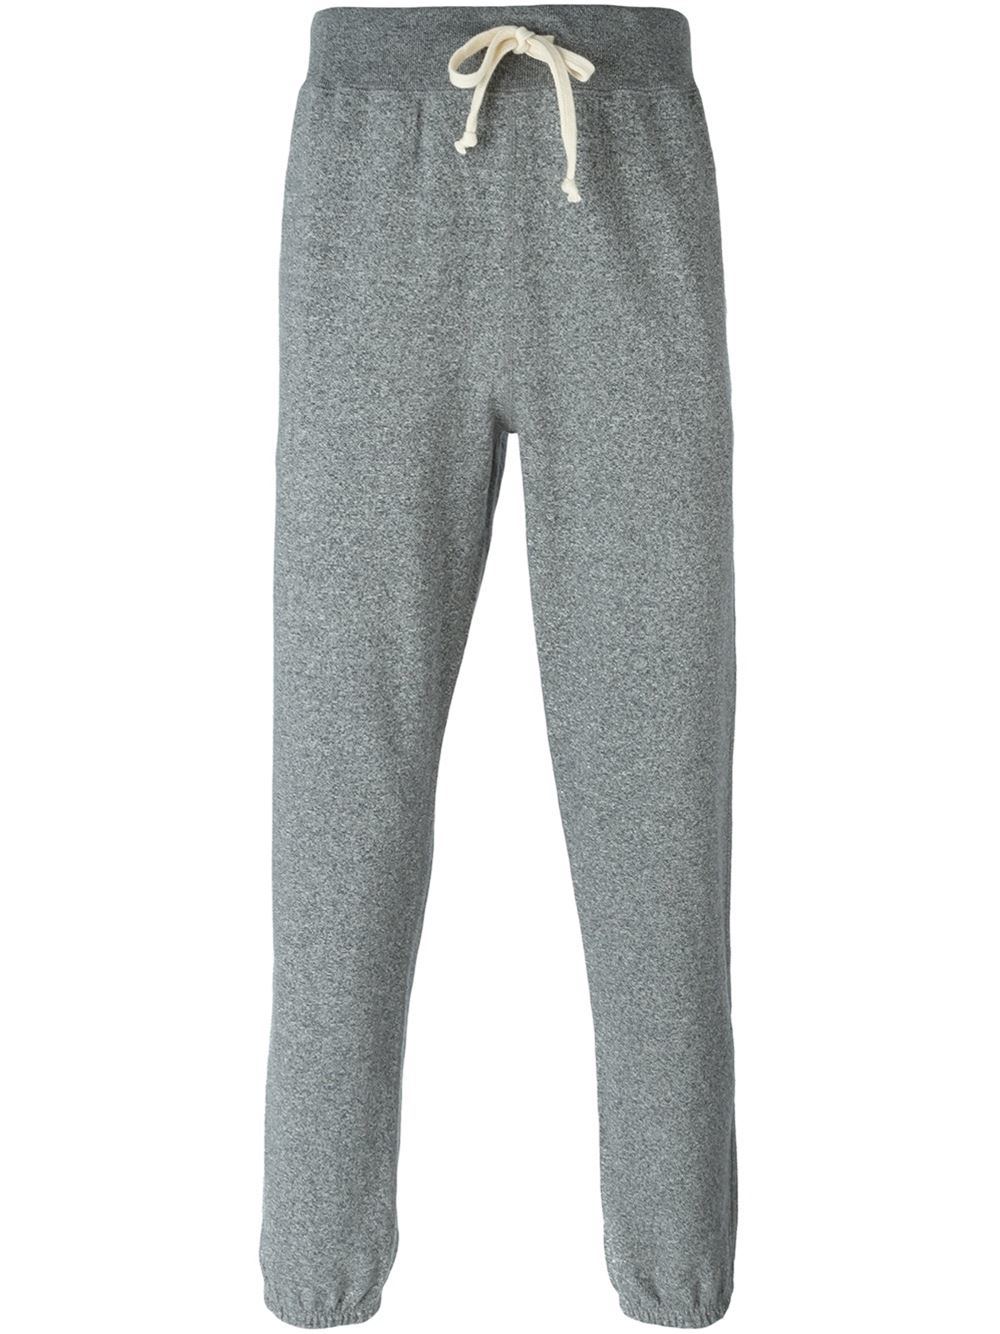 Lyst - Champion Drawstring Track Pants in Gray for Men